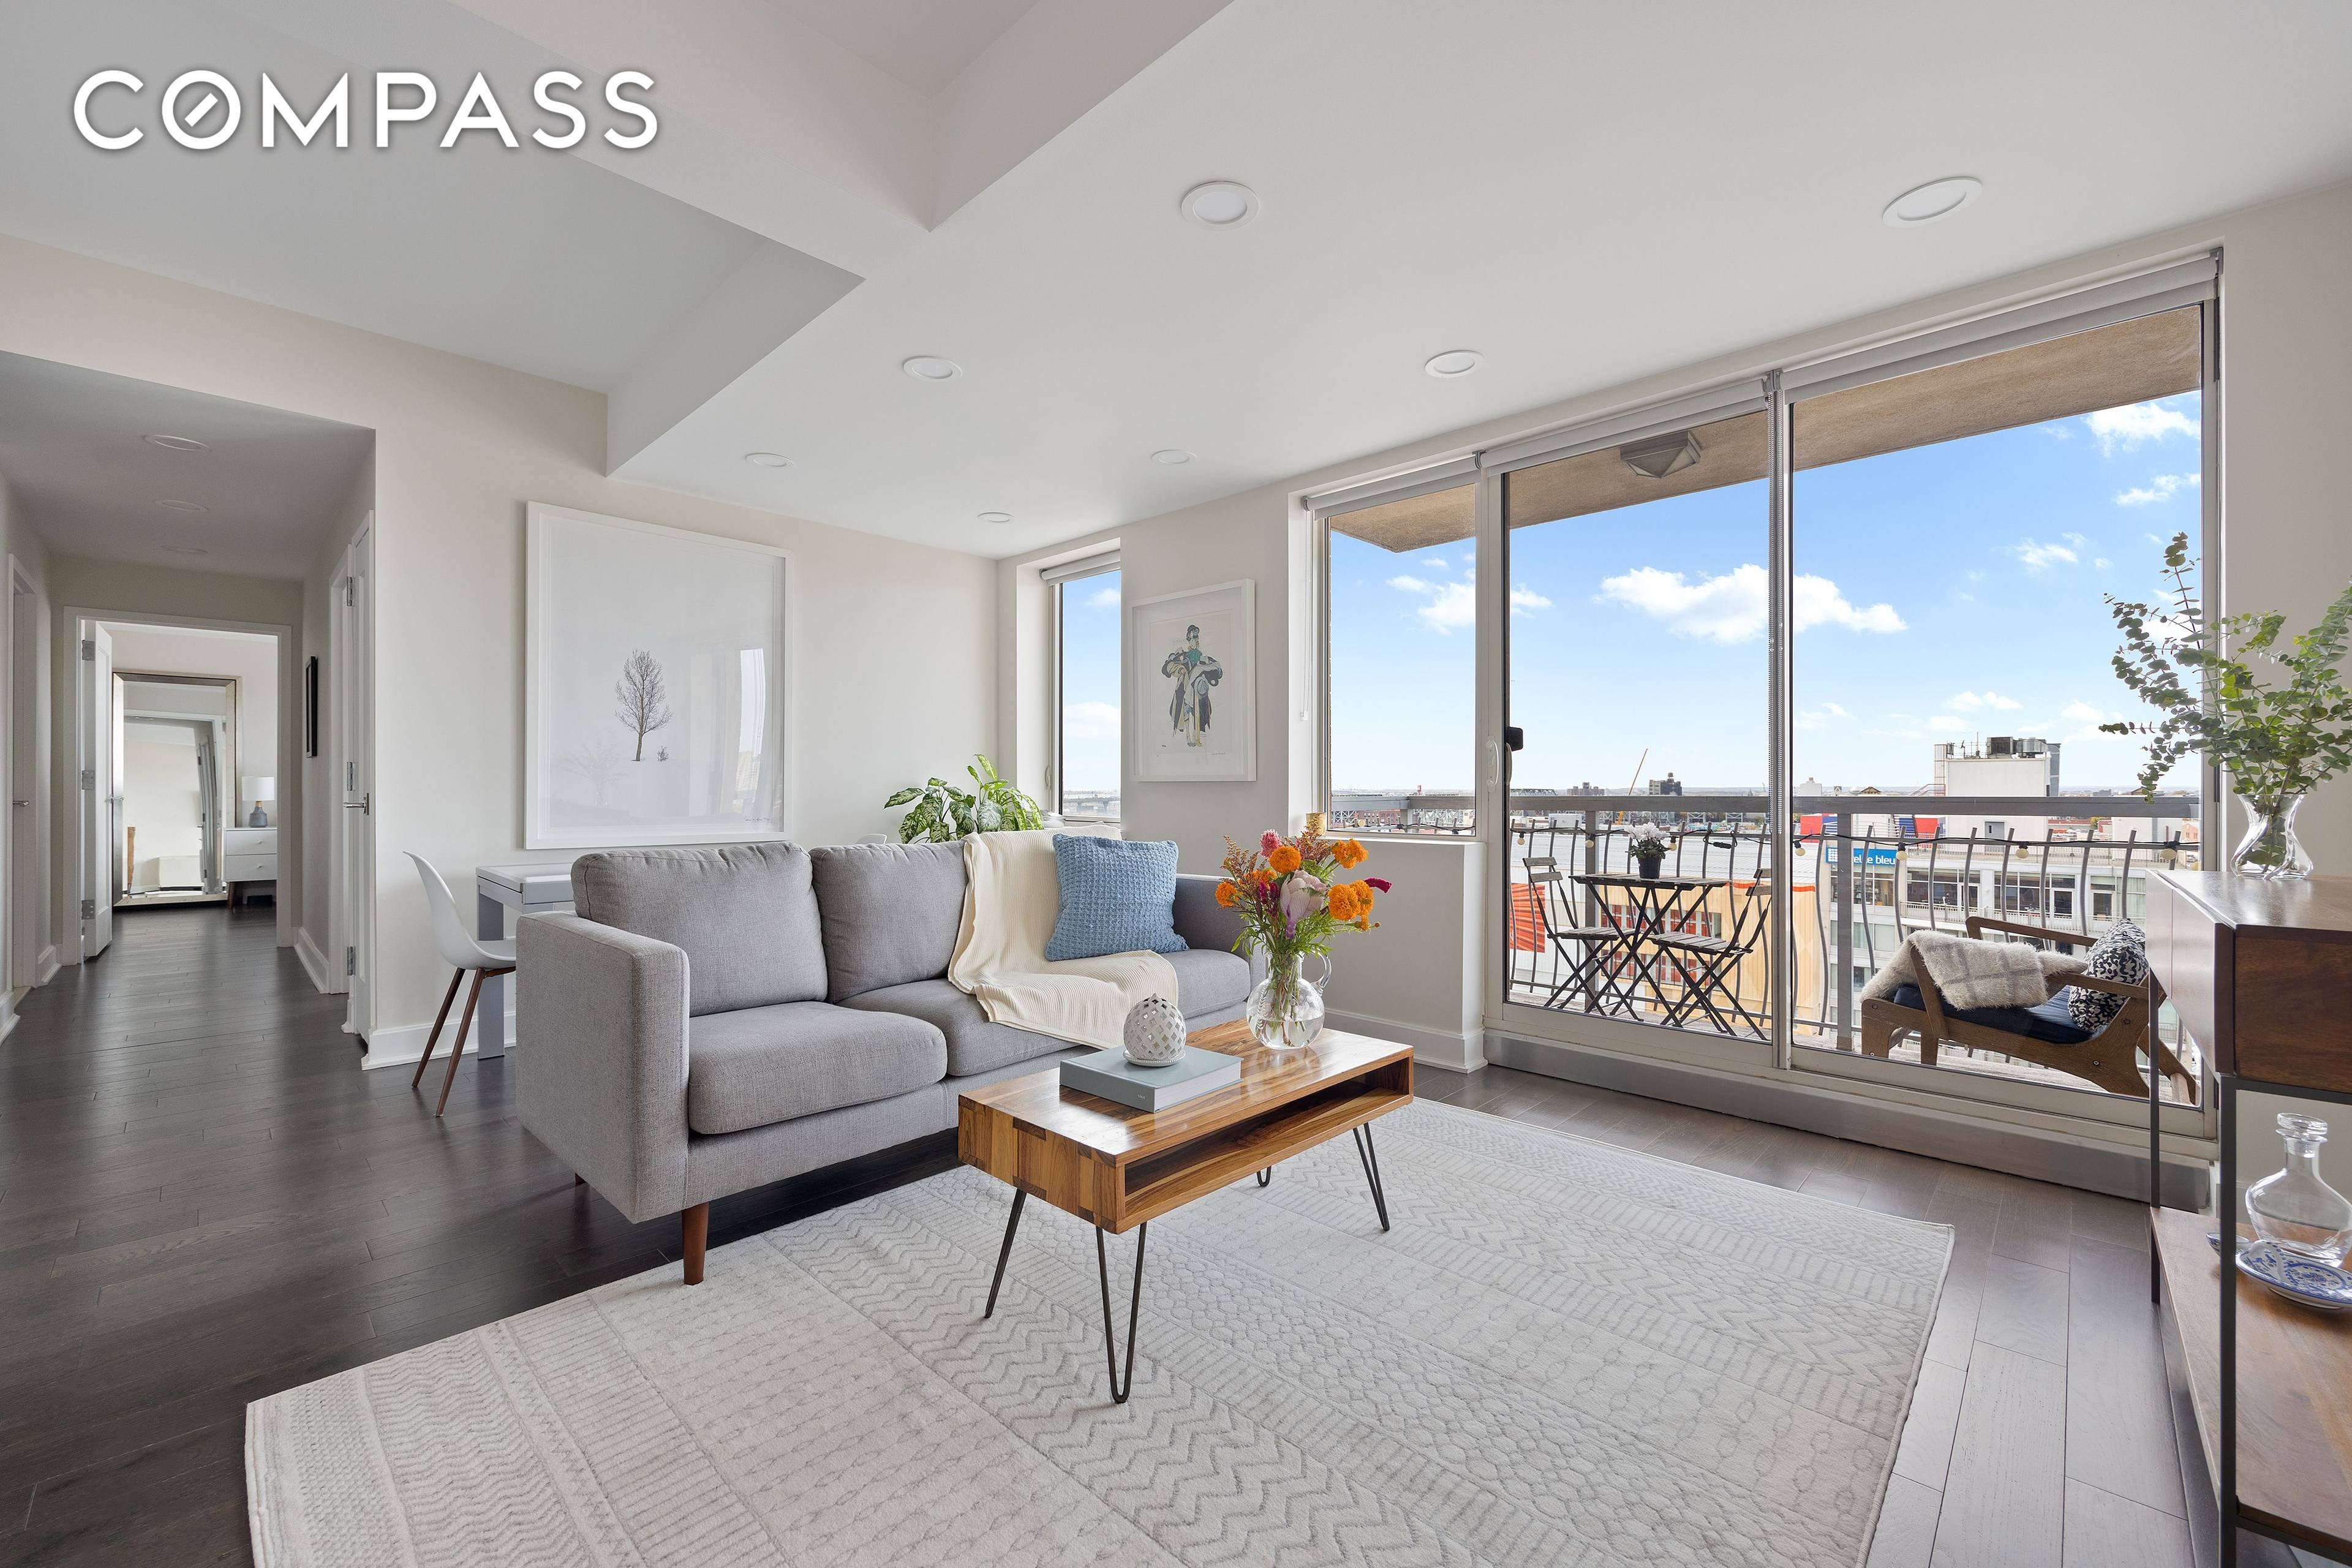 This modern, bright and airy apartment has an open living space with a private balcony offering spectacular views of the city s skyline and stunning sunsets.